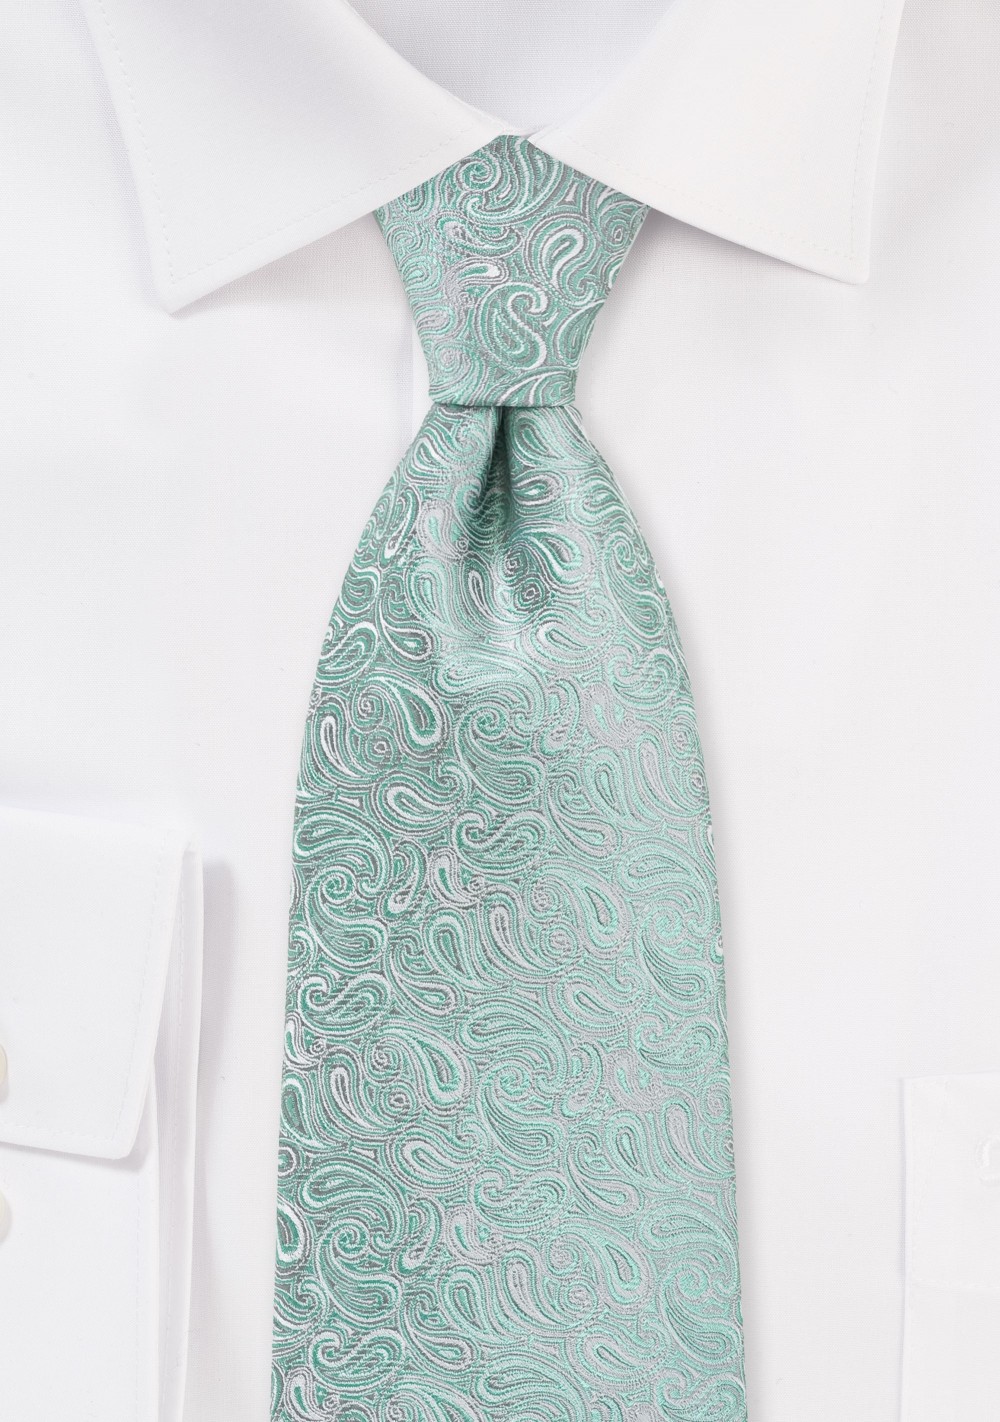 XL Modern Paisley Tie in Mint and Silver